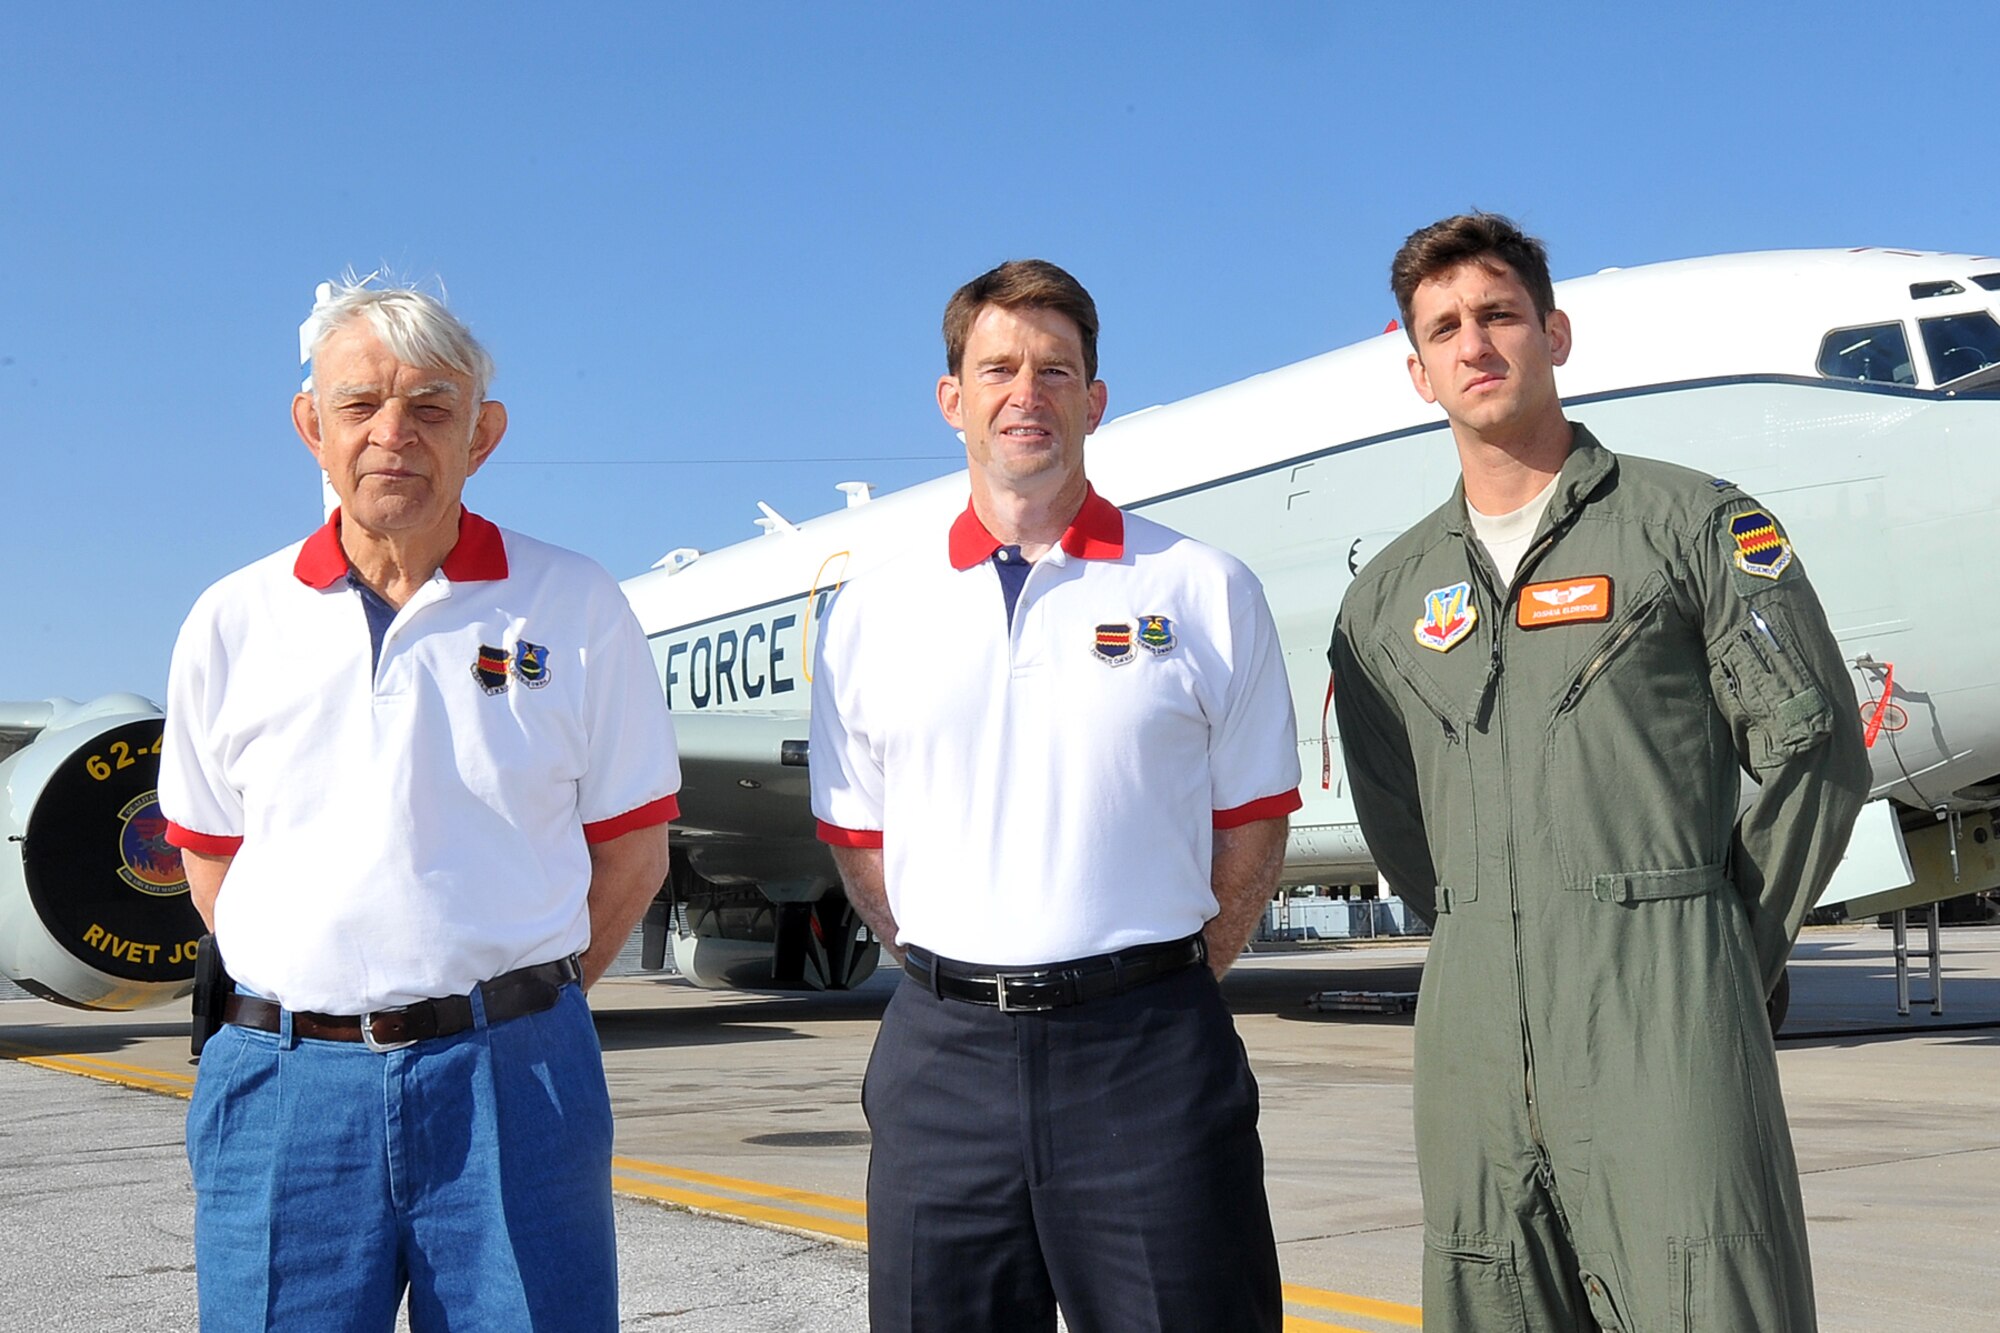 The Eldridge family, retired U.S. Air Force Lt. Col. Golda T. Eldridge Sr. (Left), retired U.S. Air Force Lt. Col. Golda T. Eldridge Jr. (Center) and U.S. Air Force 1st Lt. Joshua Eldridge (Right) stand next to an RC-135V/W Rivet Joint. The Eldridge family is the first to have a third generation pilot become part of the 55th Wing at Offutt Air Force Base.